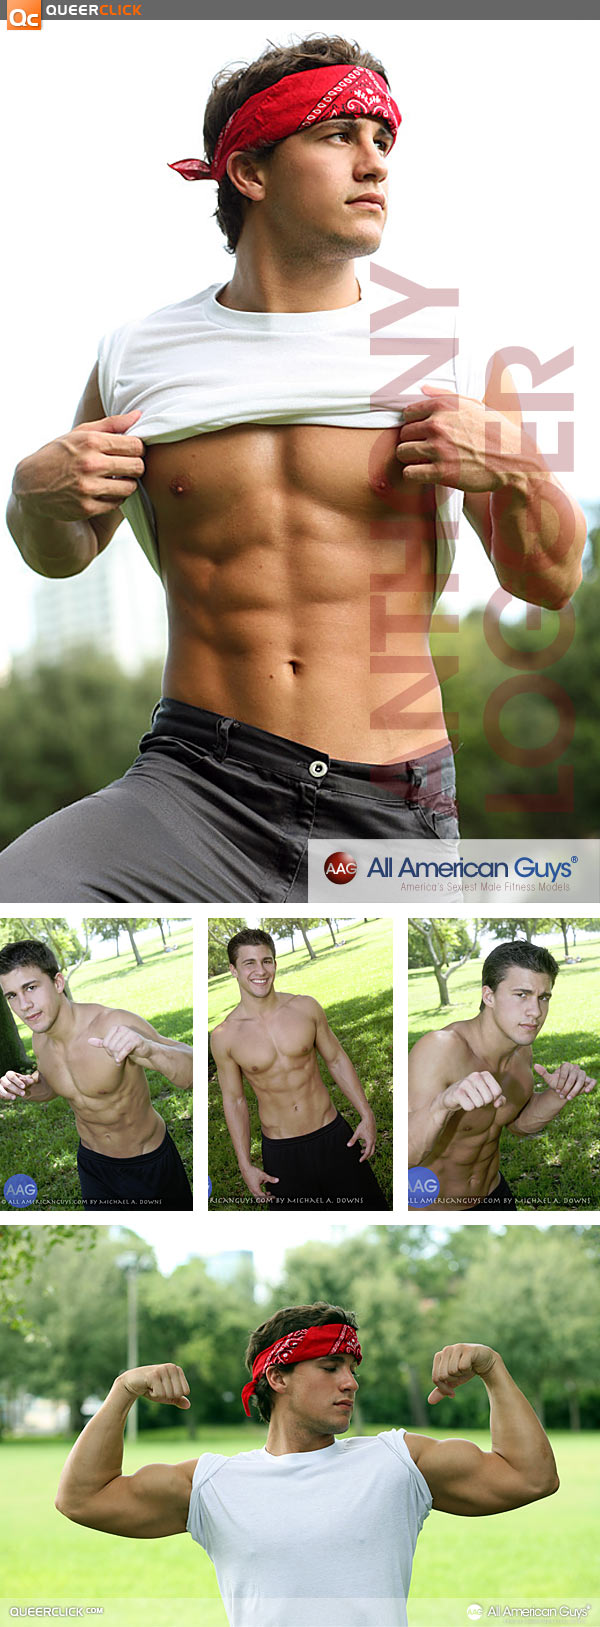 All American Guys: Anthony Logger